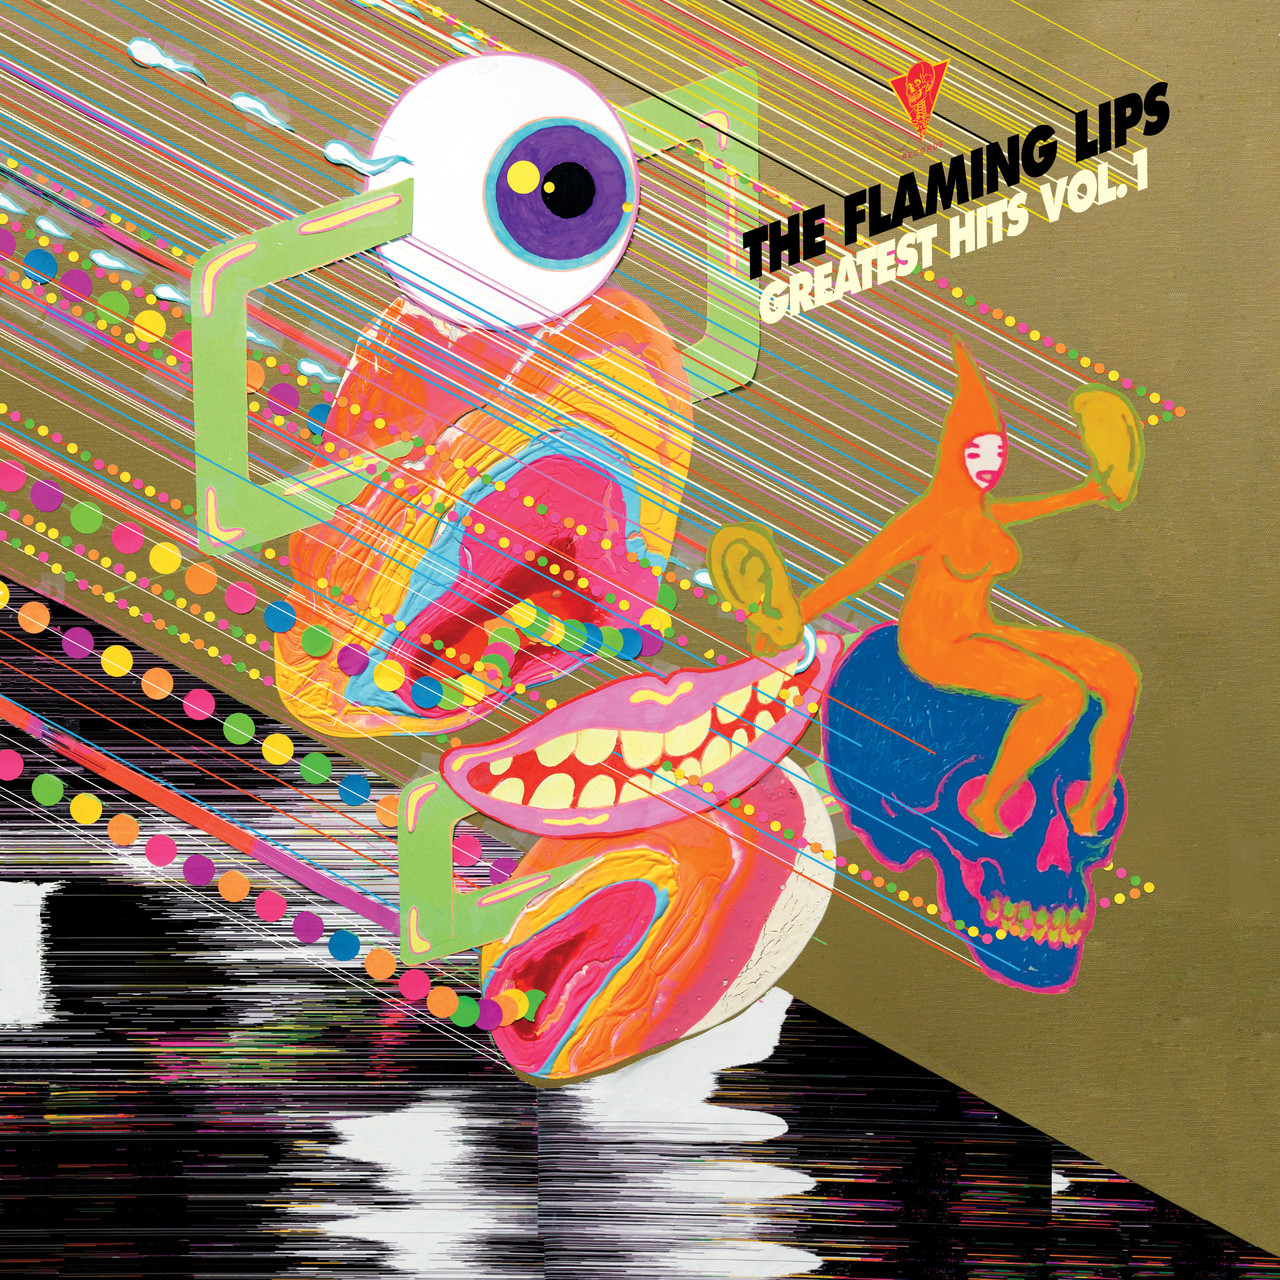 The Flaming Lips, Greatest Hits Vol. 1